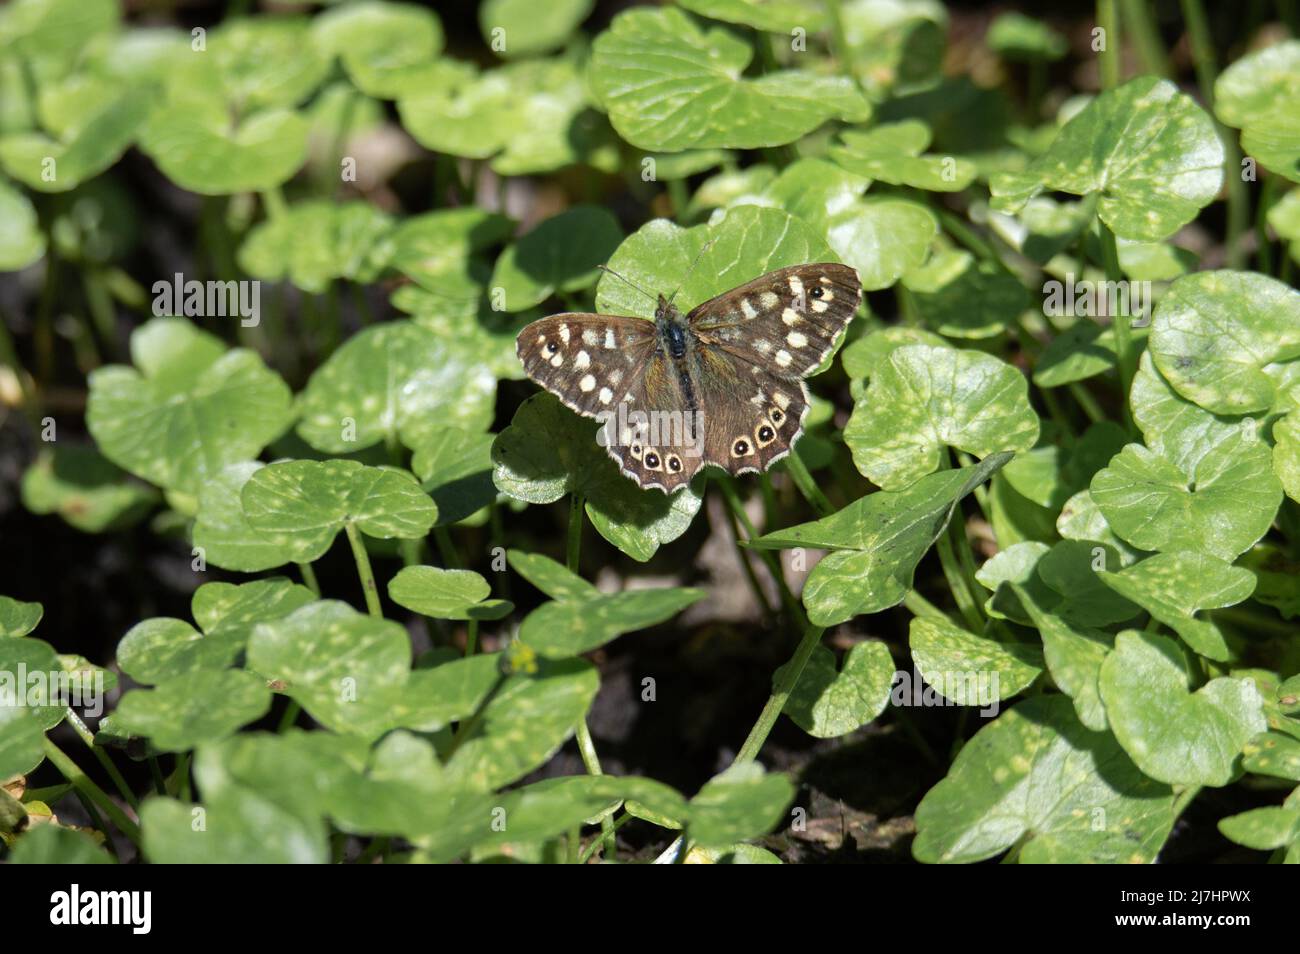 Speckled Wood butterfly on shiny green leaves Stock Photo